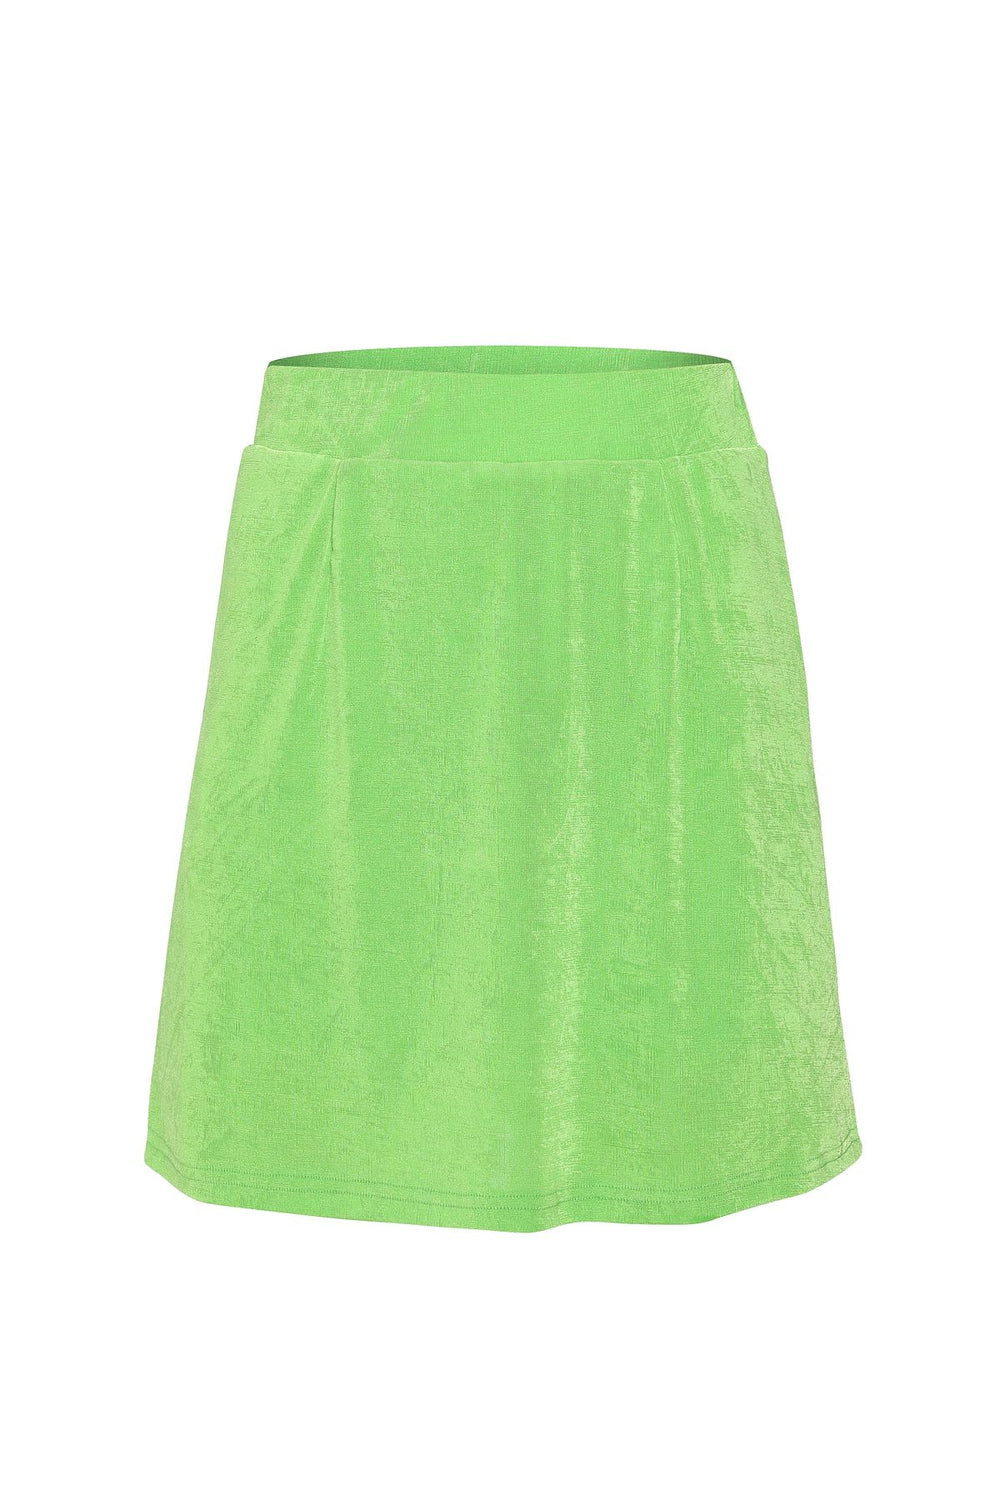 Textured Skirt With Shorts Neon Green